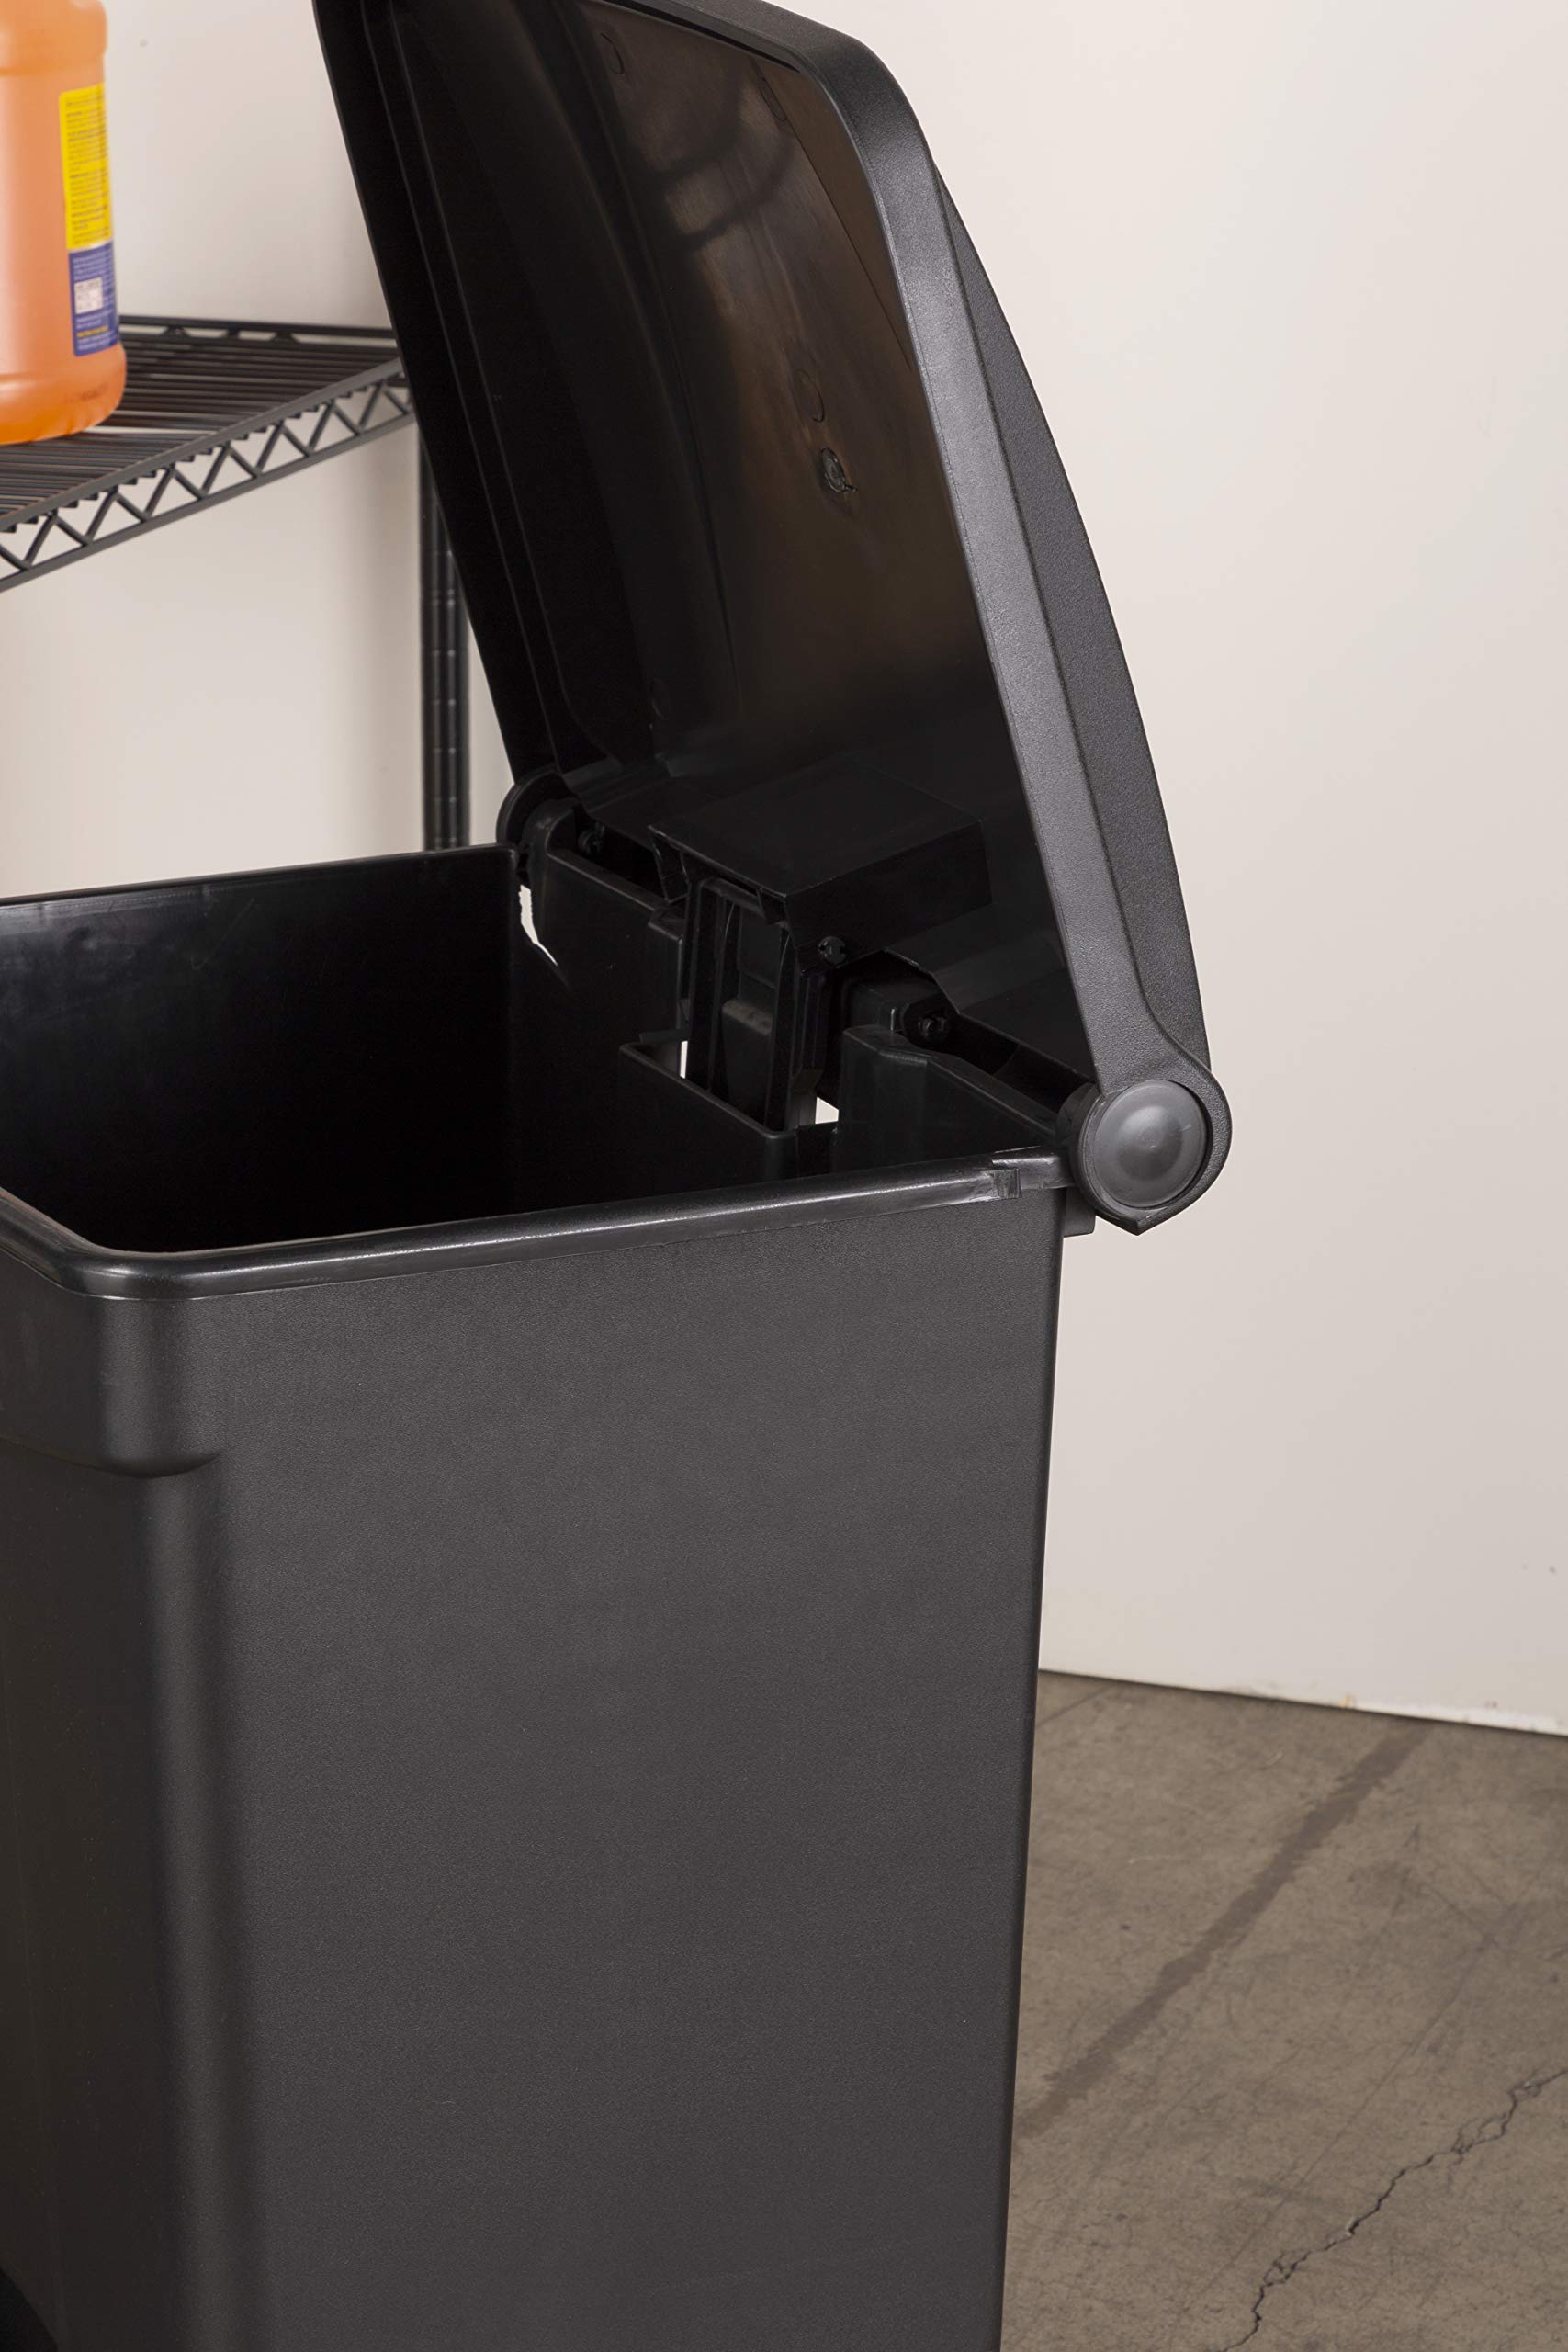 Safco Products Plastic Step-On Trash Can 9923BL, Black, Hands-Free Disposal, 23-Gallon Capacity